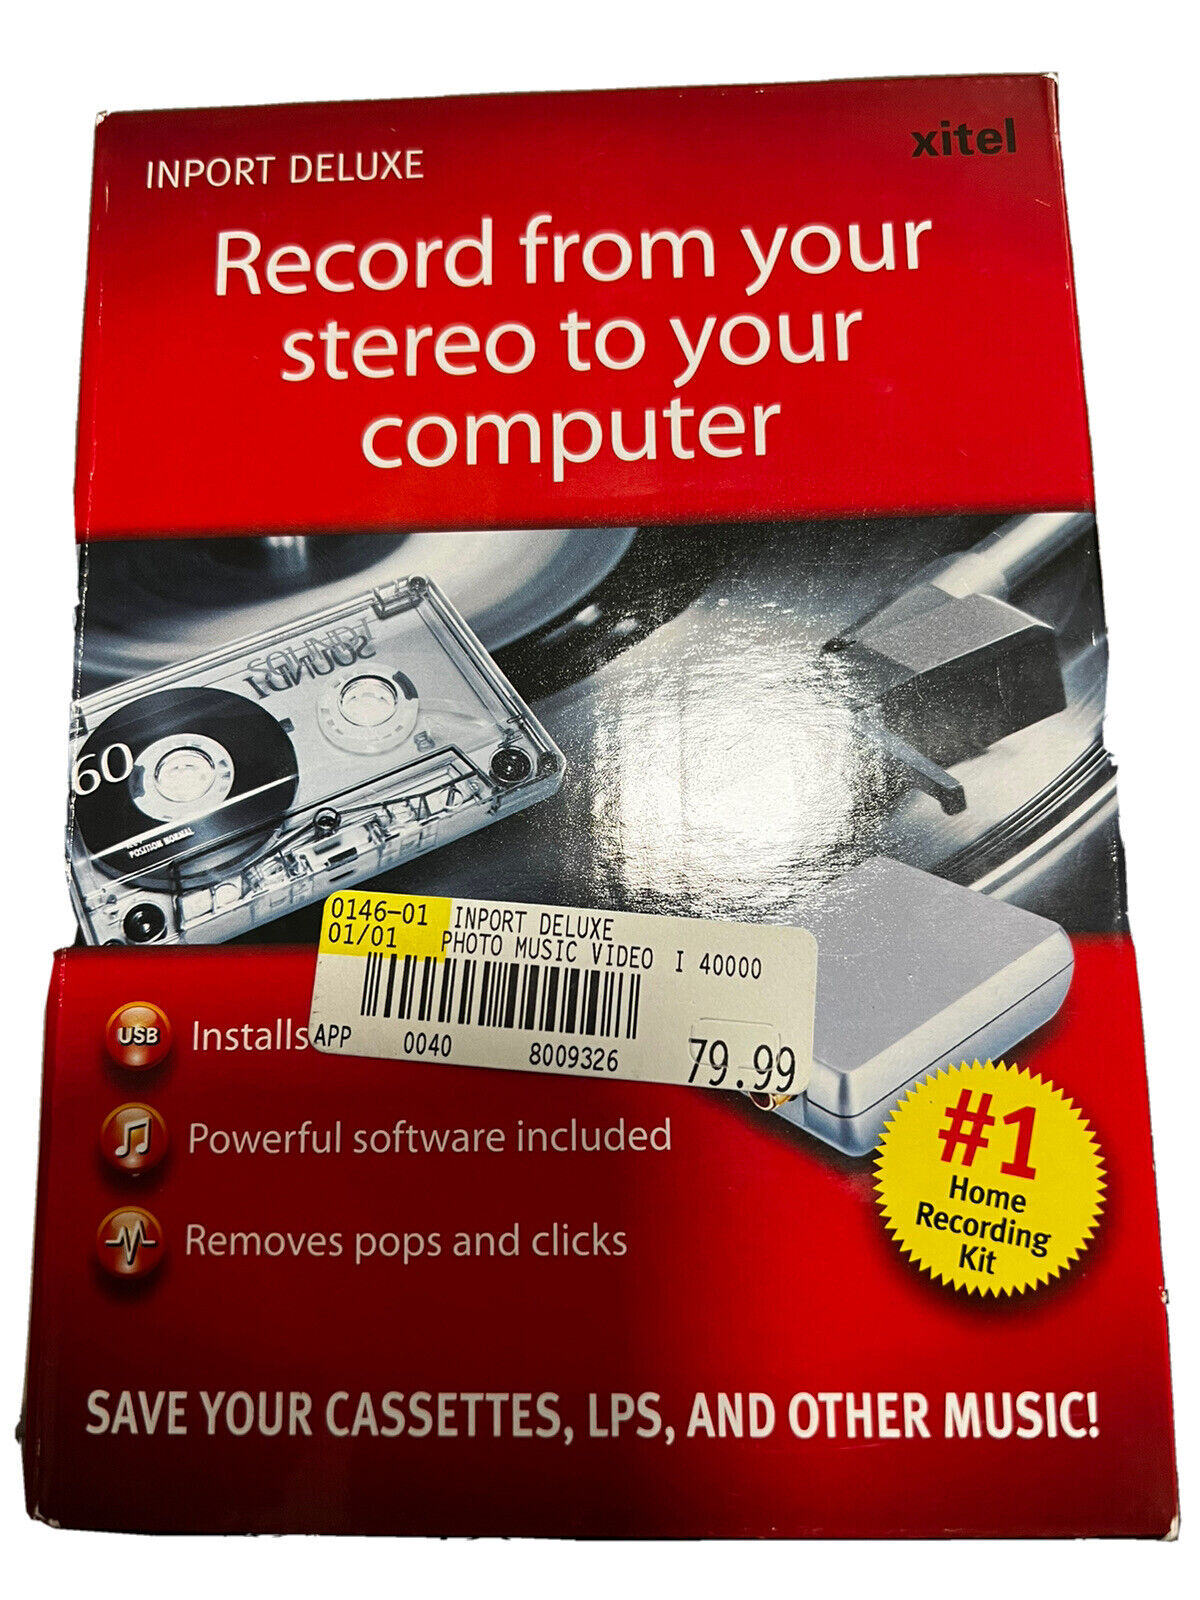  Record From Your Stereo To Your Computer inport deluxe audio recording kit NEW